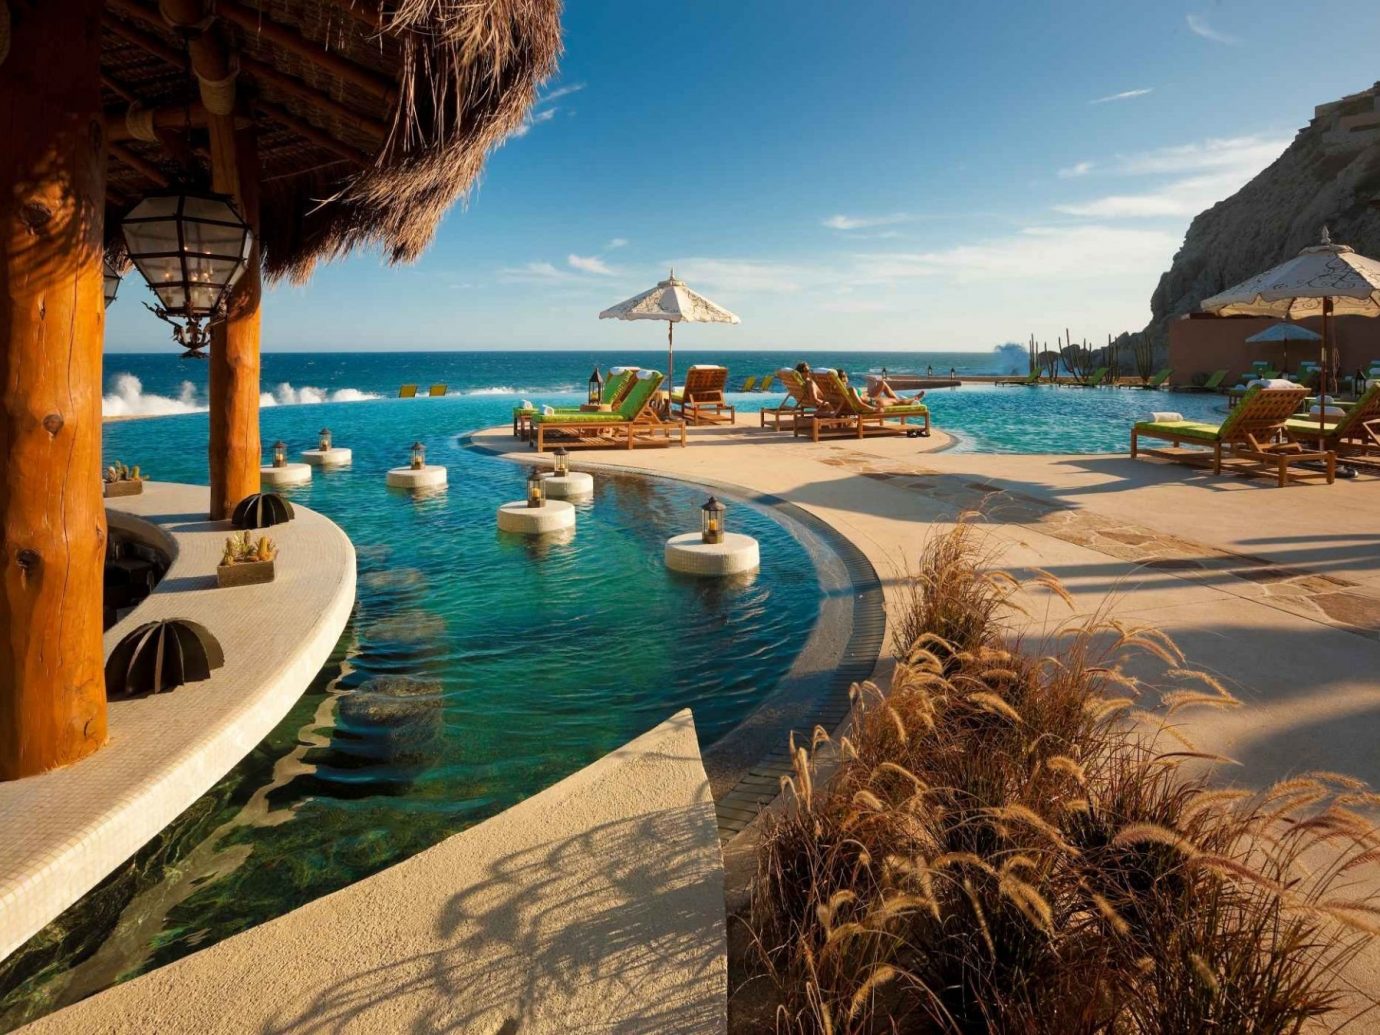 Infinity Pool At The Resort At Pedregal In Mexico